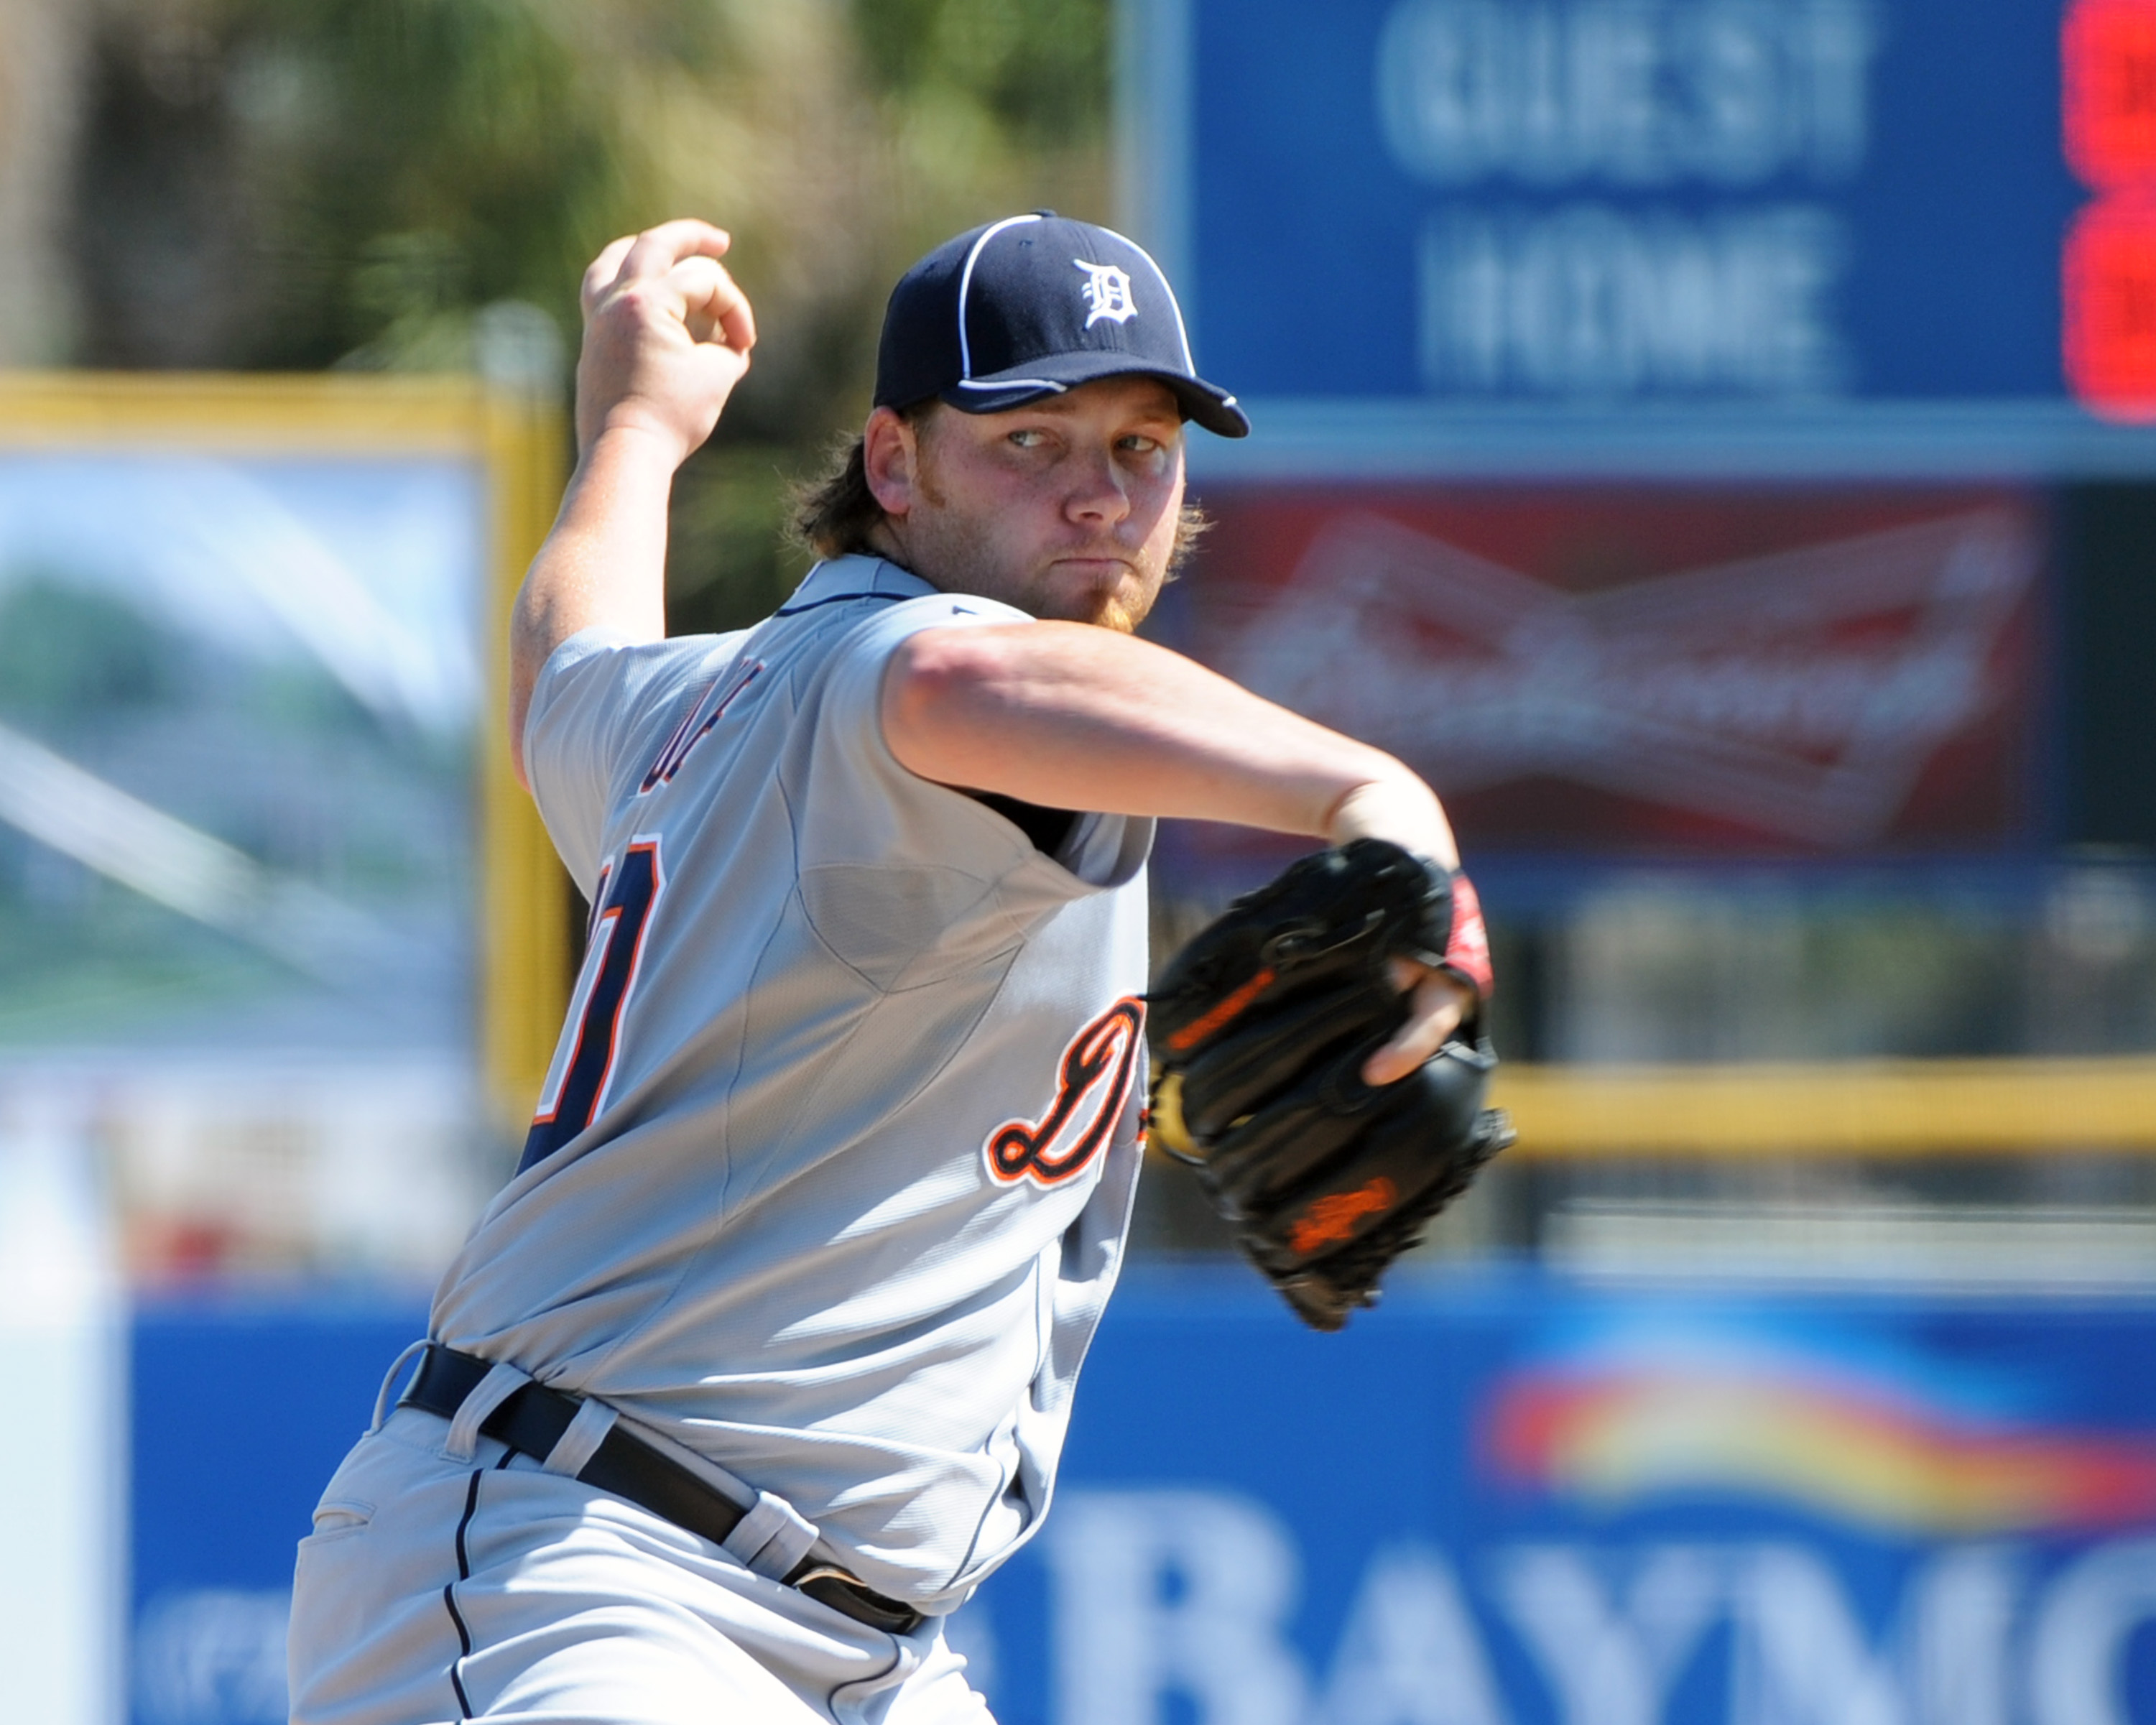 DUNEDIN, FL - FEBRUARY 26:  Pitcher Phil Coke #40 of the Detroit Tigers starts against the Toronto Blue Jays February 26, 2011 at Florida Auto Exchange Stadium in Dunedin, Florida.  (Photo by Al Messerschmidt/Getty Images)